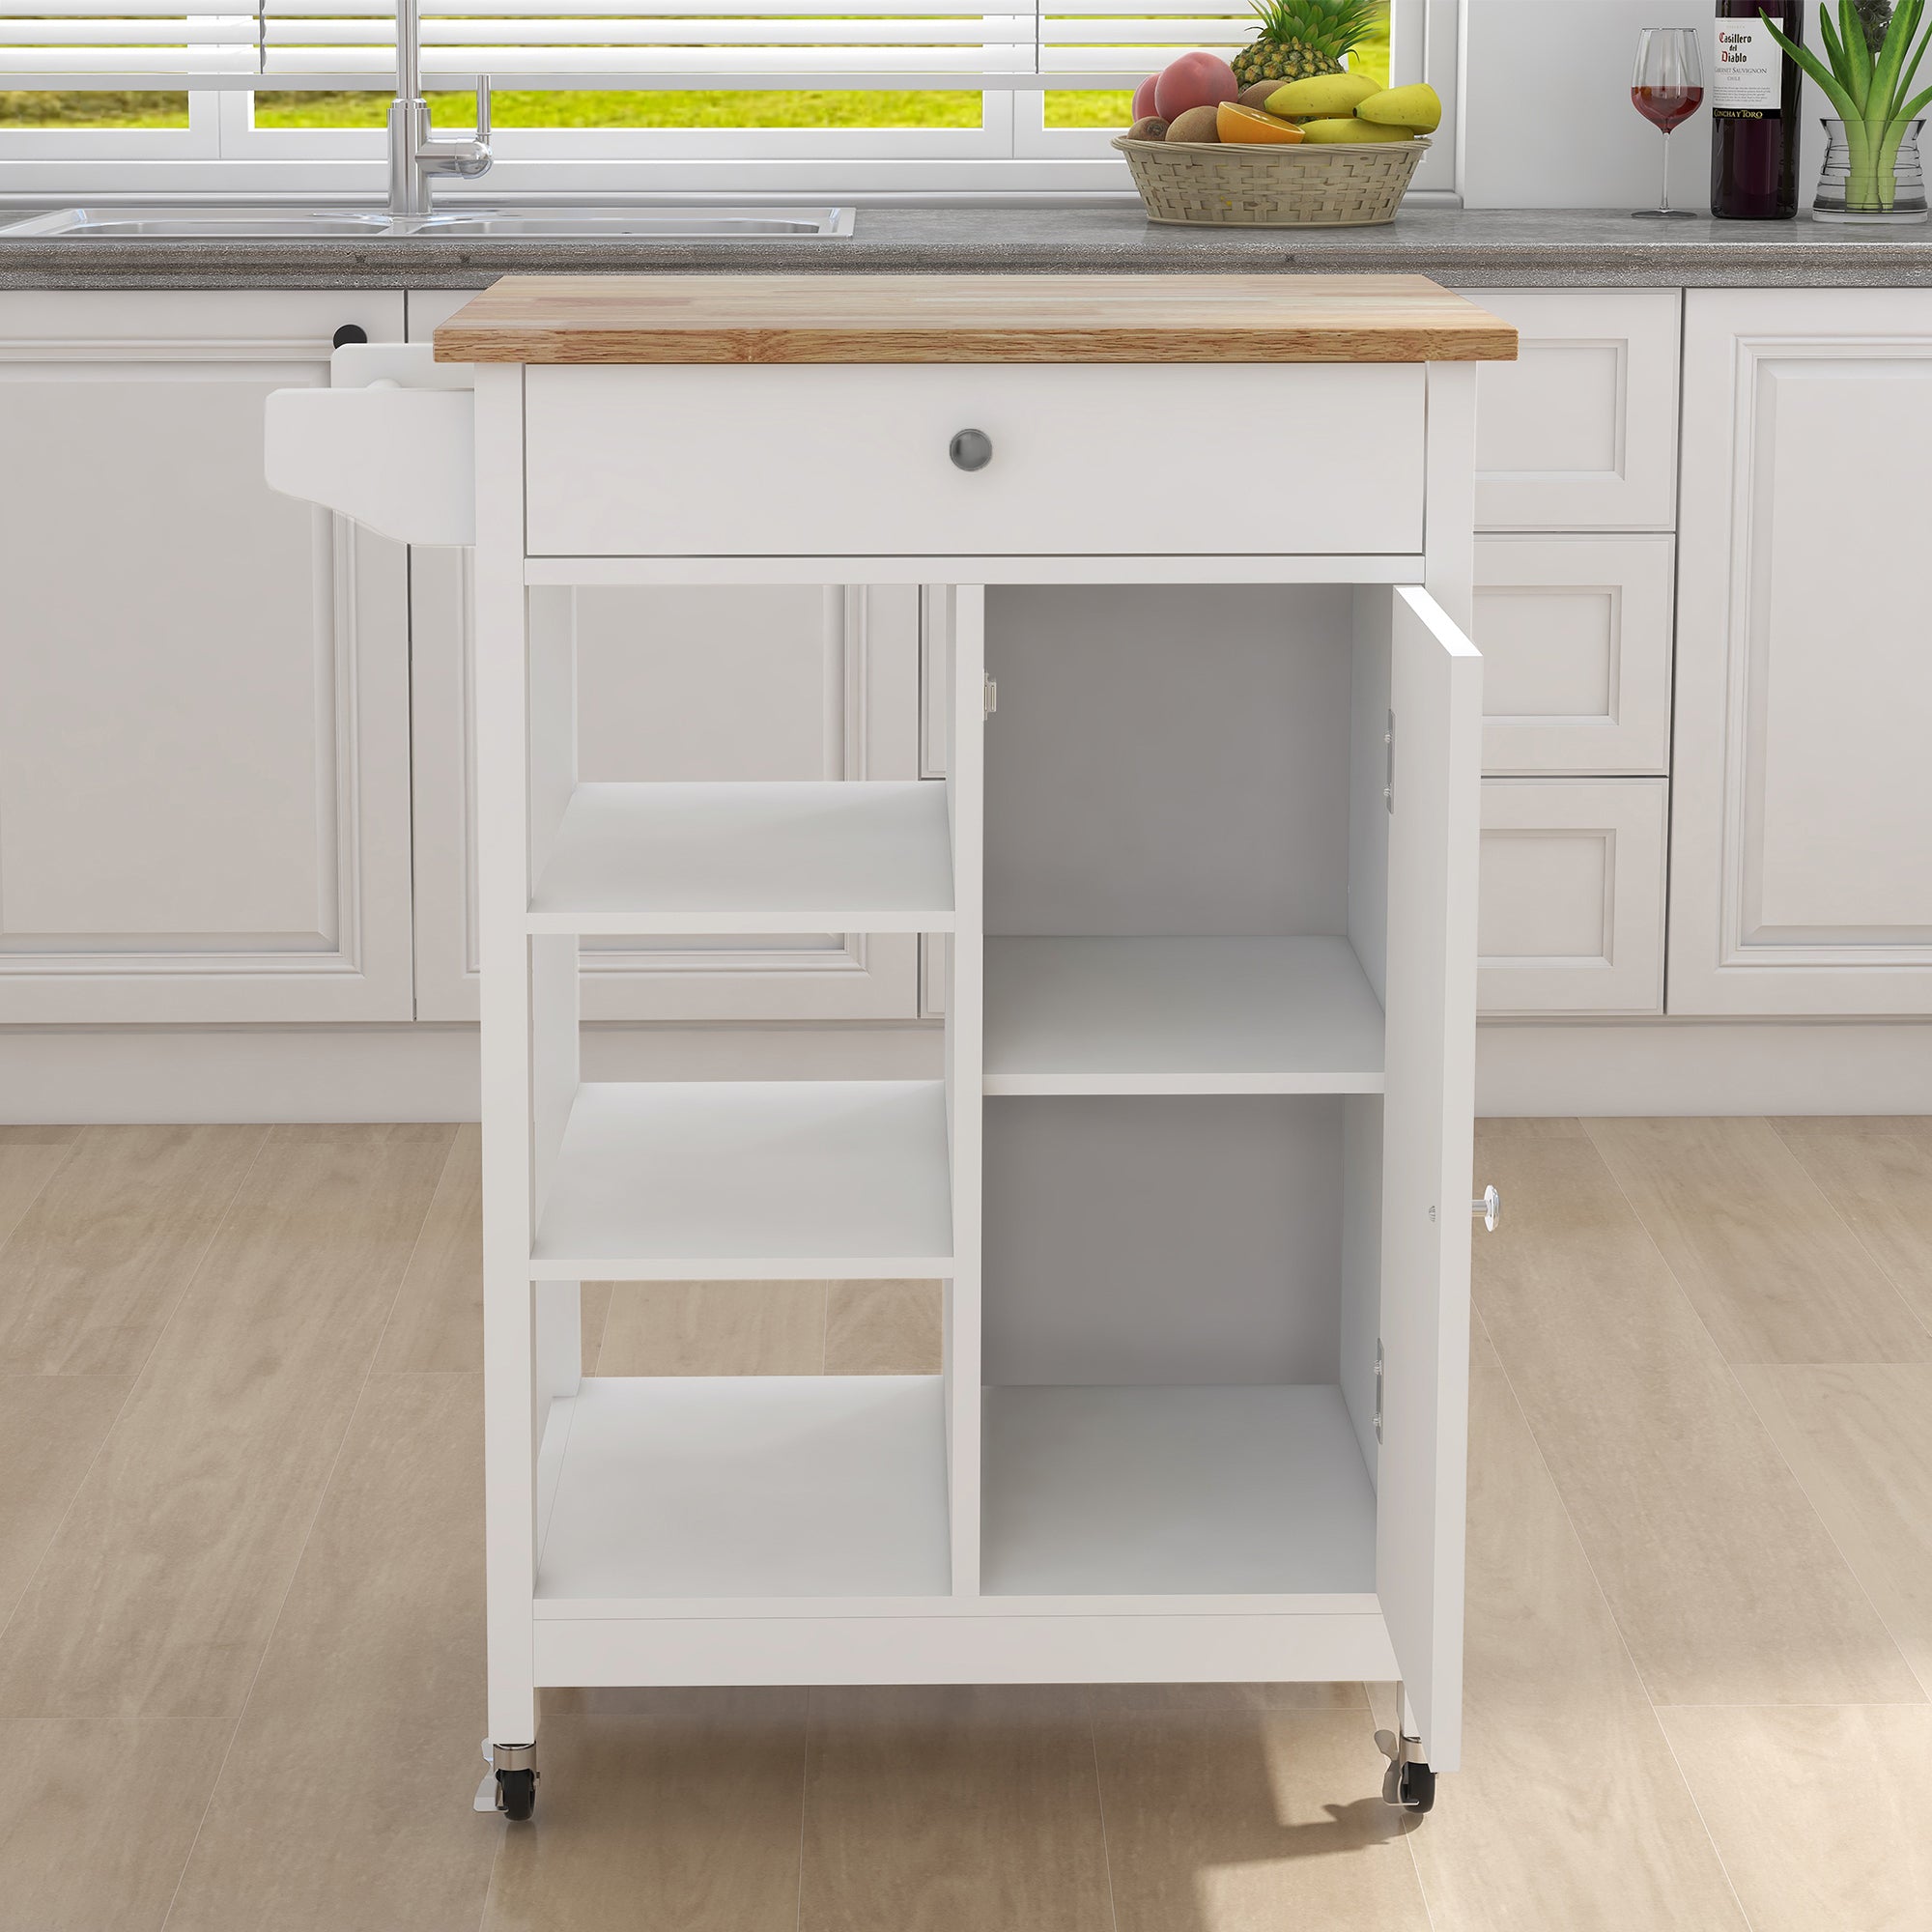 Small Space Kitchen Rolling Cart with Towel Rack and Solid Wood Top